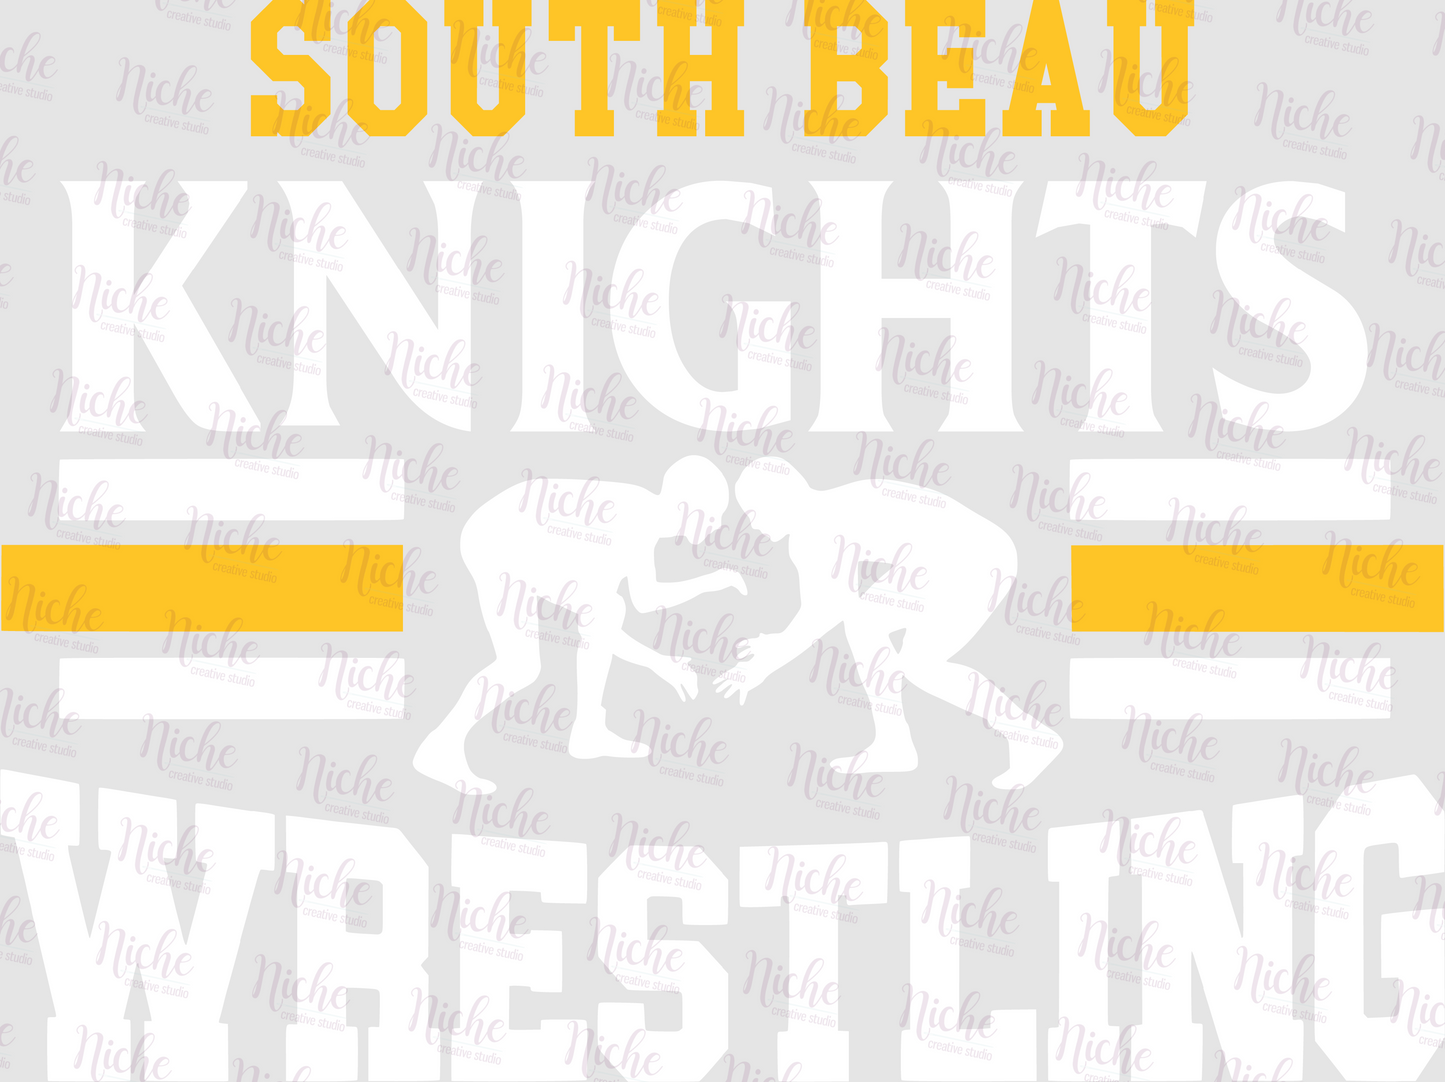 -SOU932 South Beau Knights Wrestling Decal